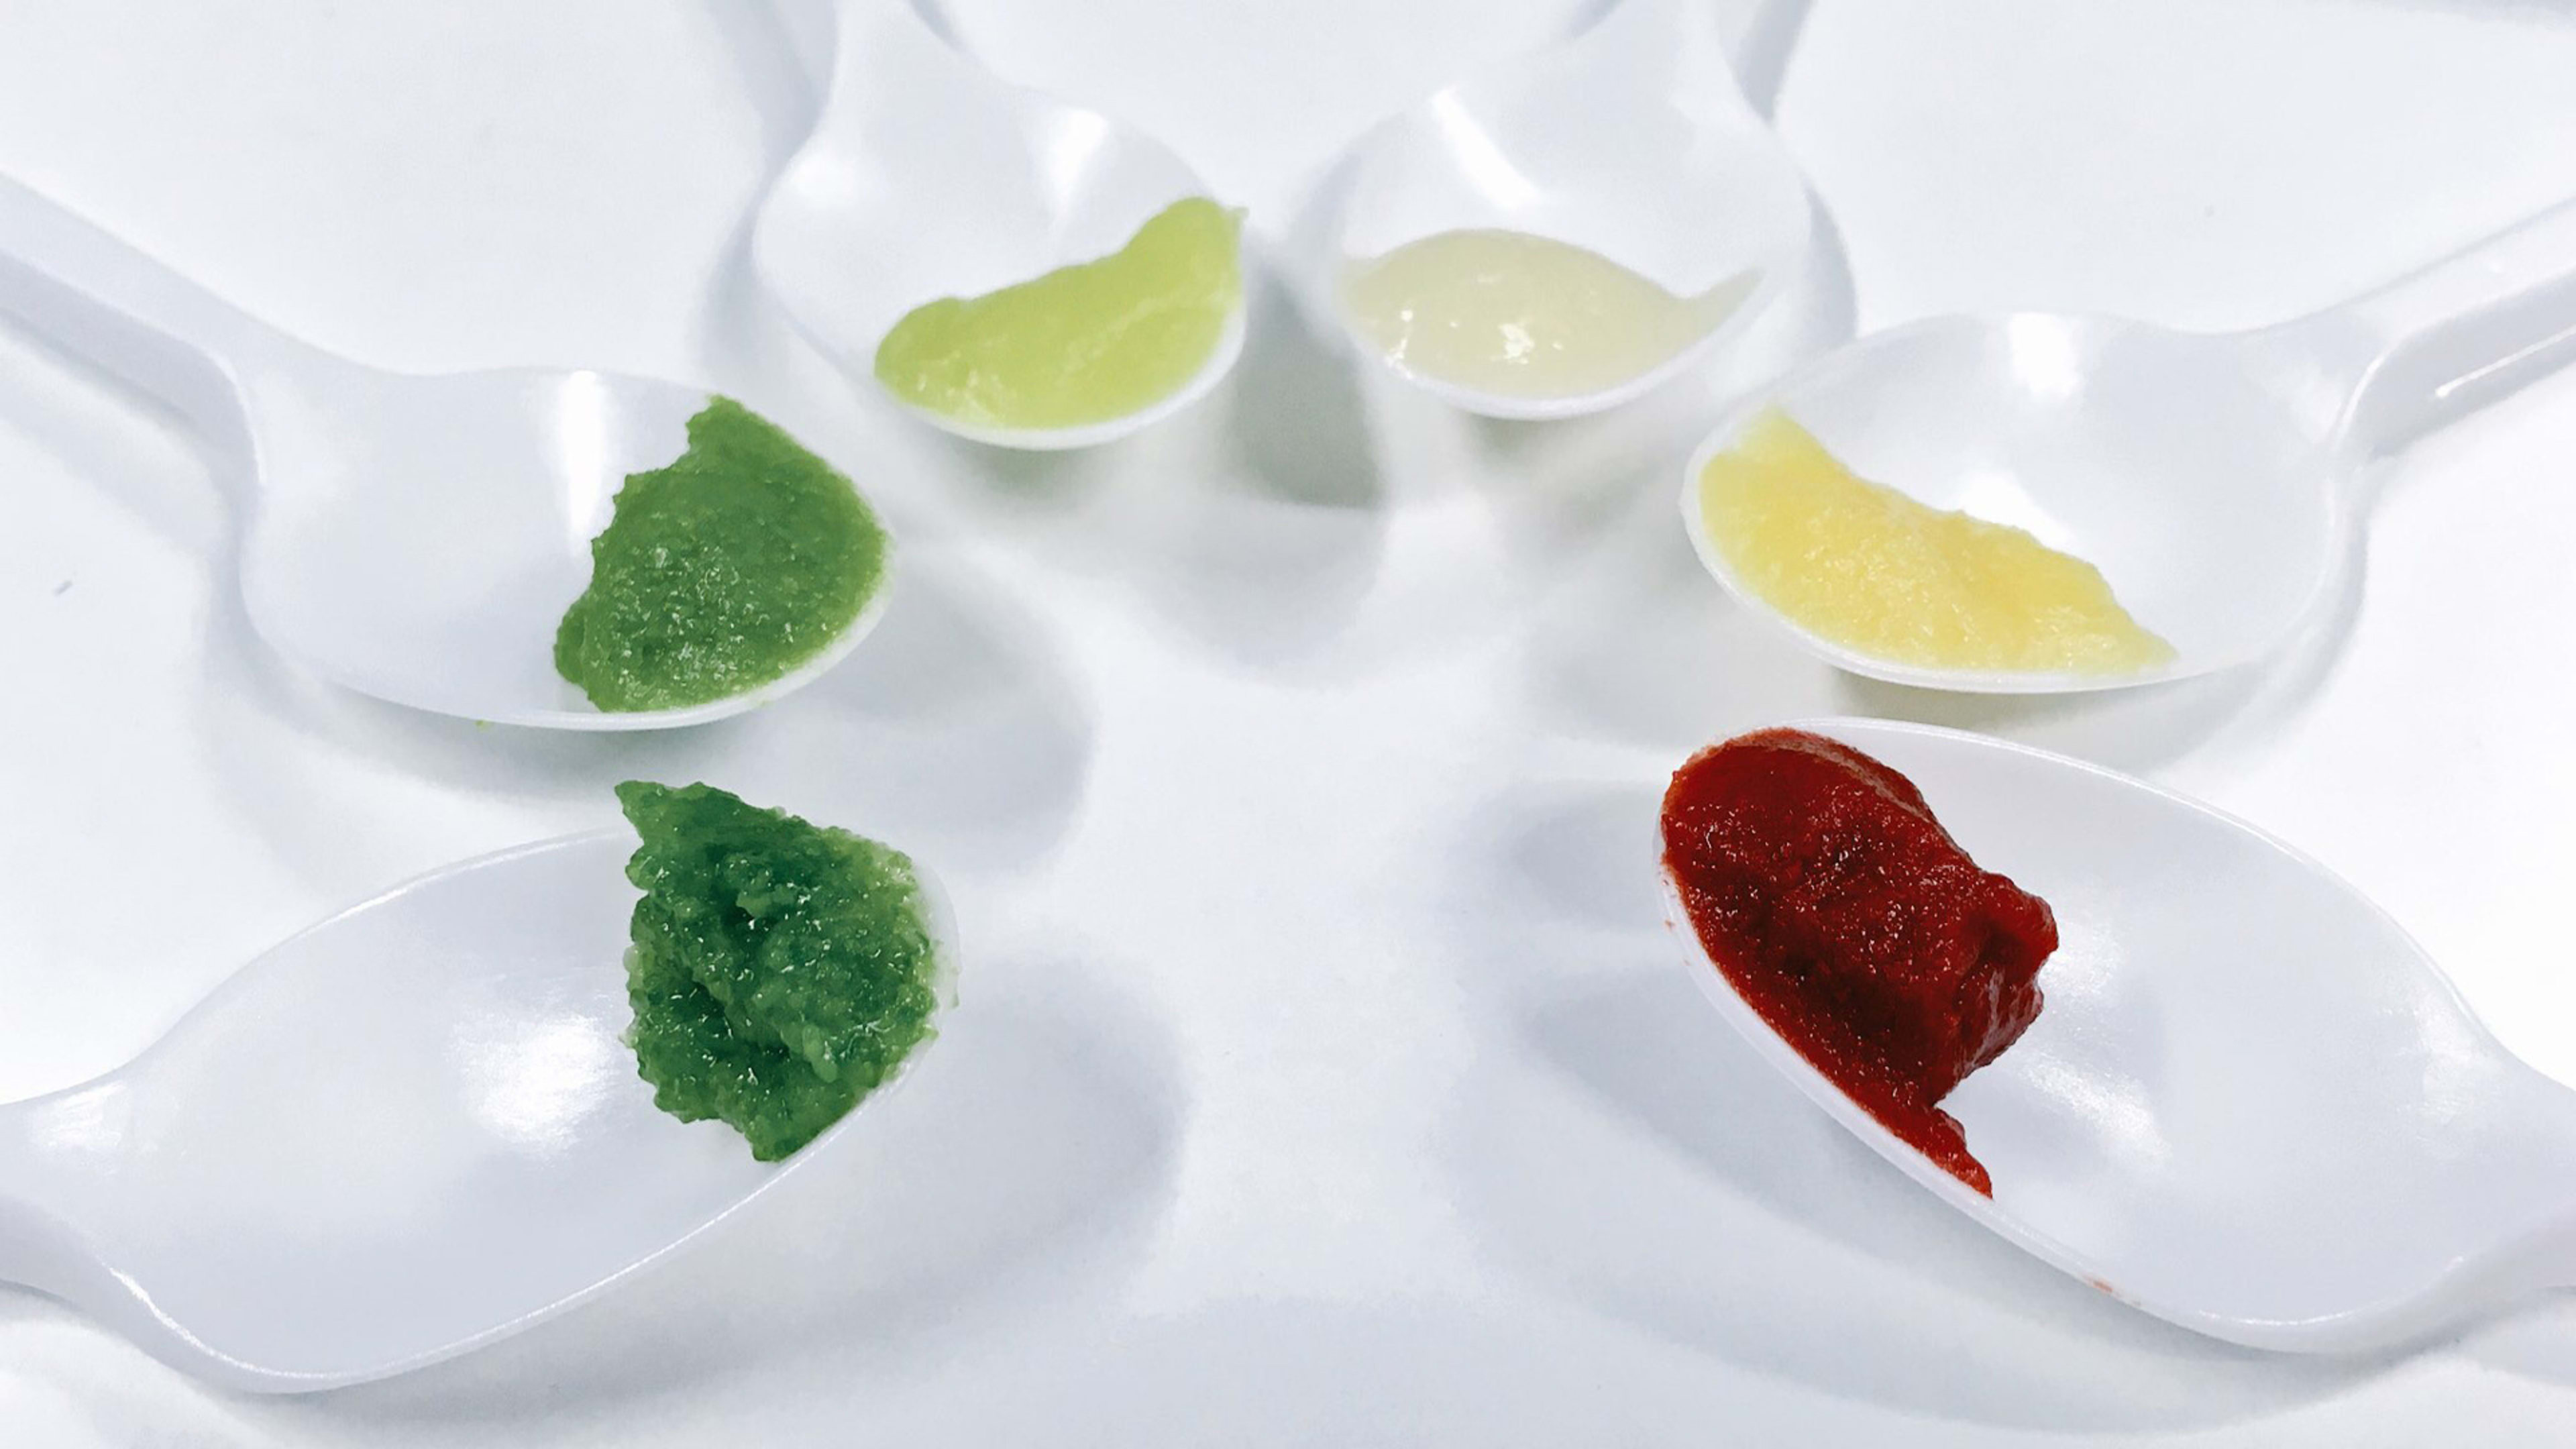 In The Future, You Could Eat This Edible Goo You Grow In Your Kitchen